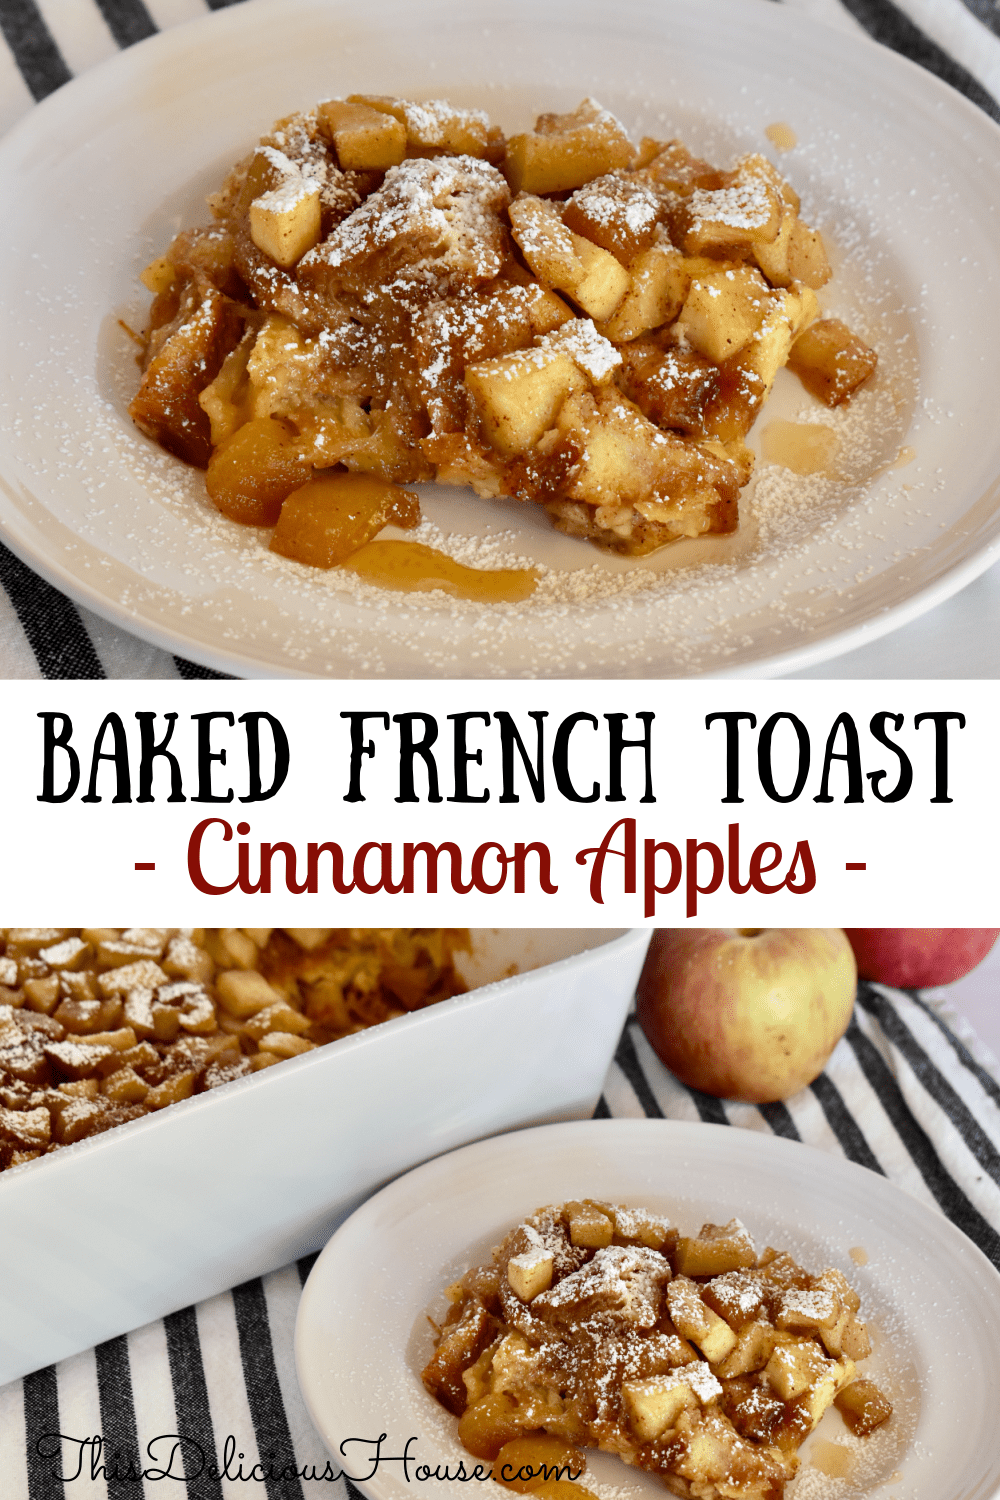 Croissant Baked French Toast with Cinnamon Apples. 